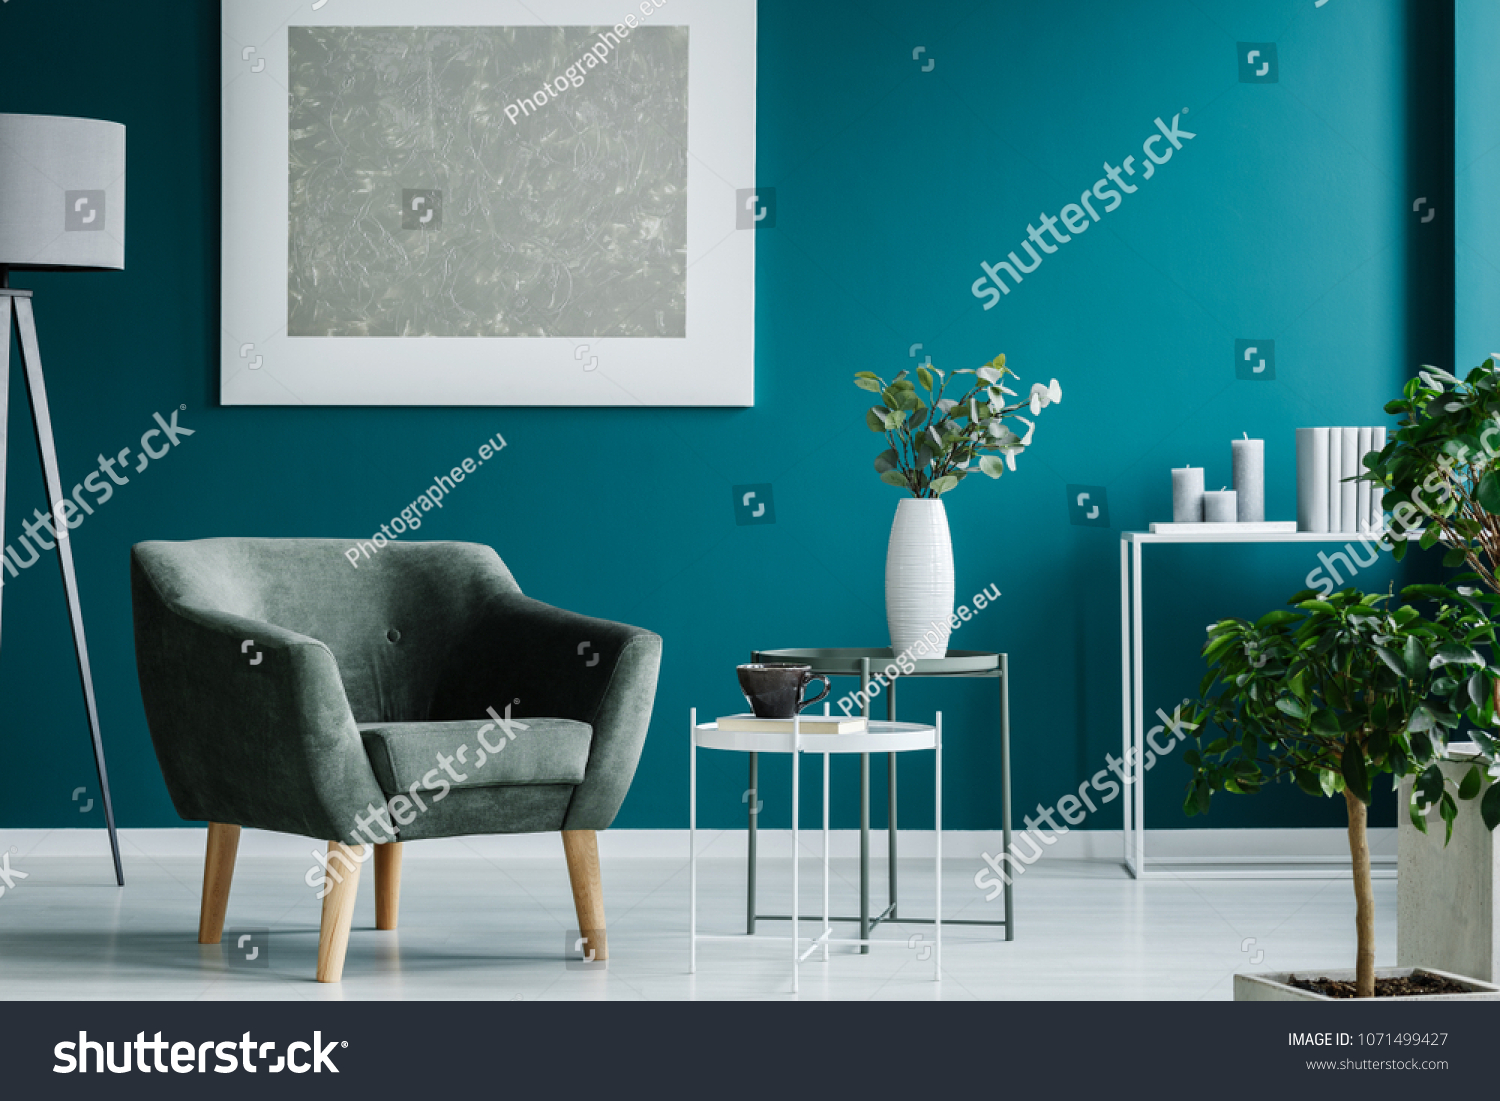 Green armchair against blue wall with silver painting in living room interior with plants #1071499427